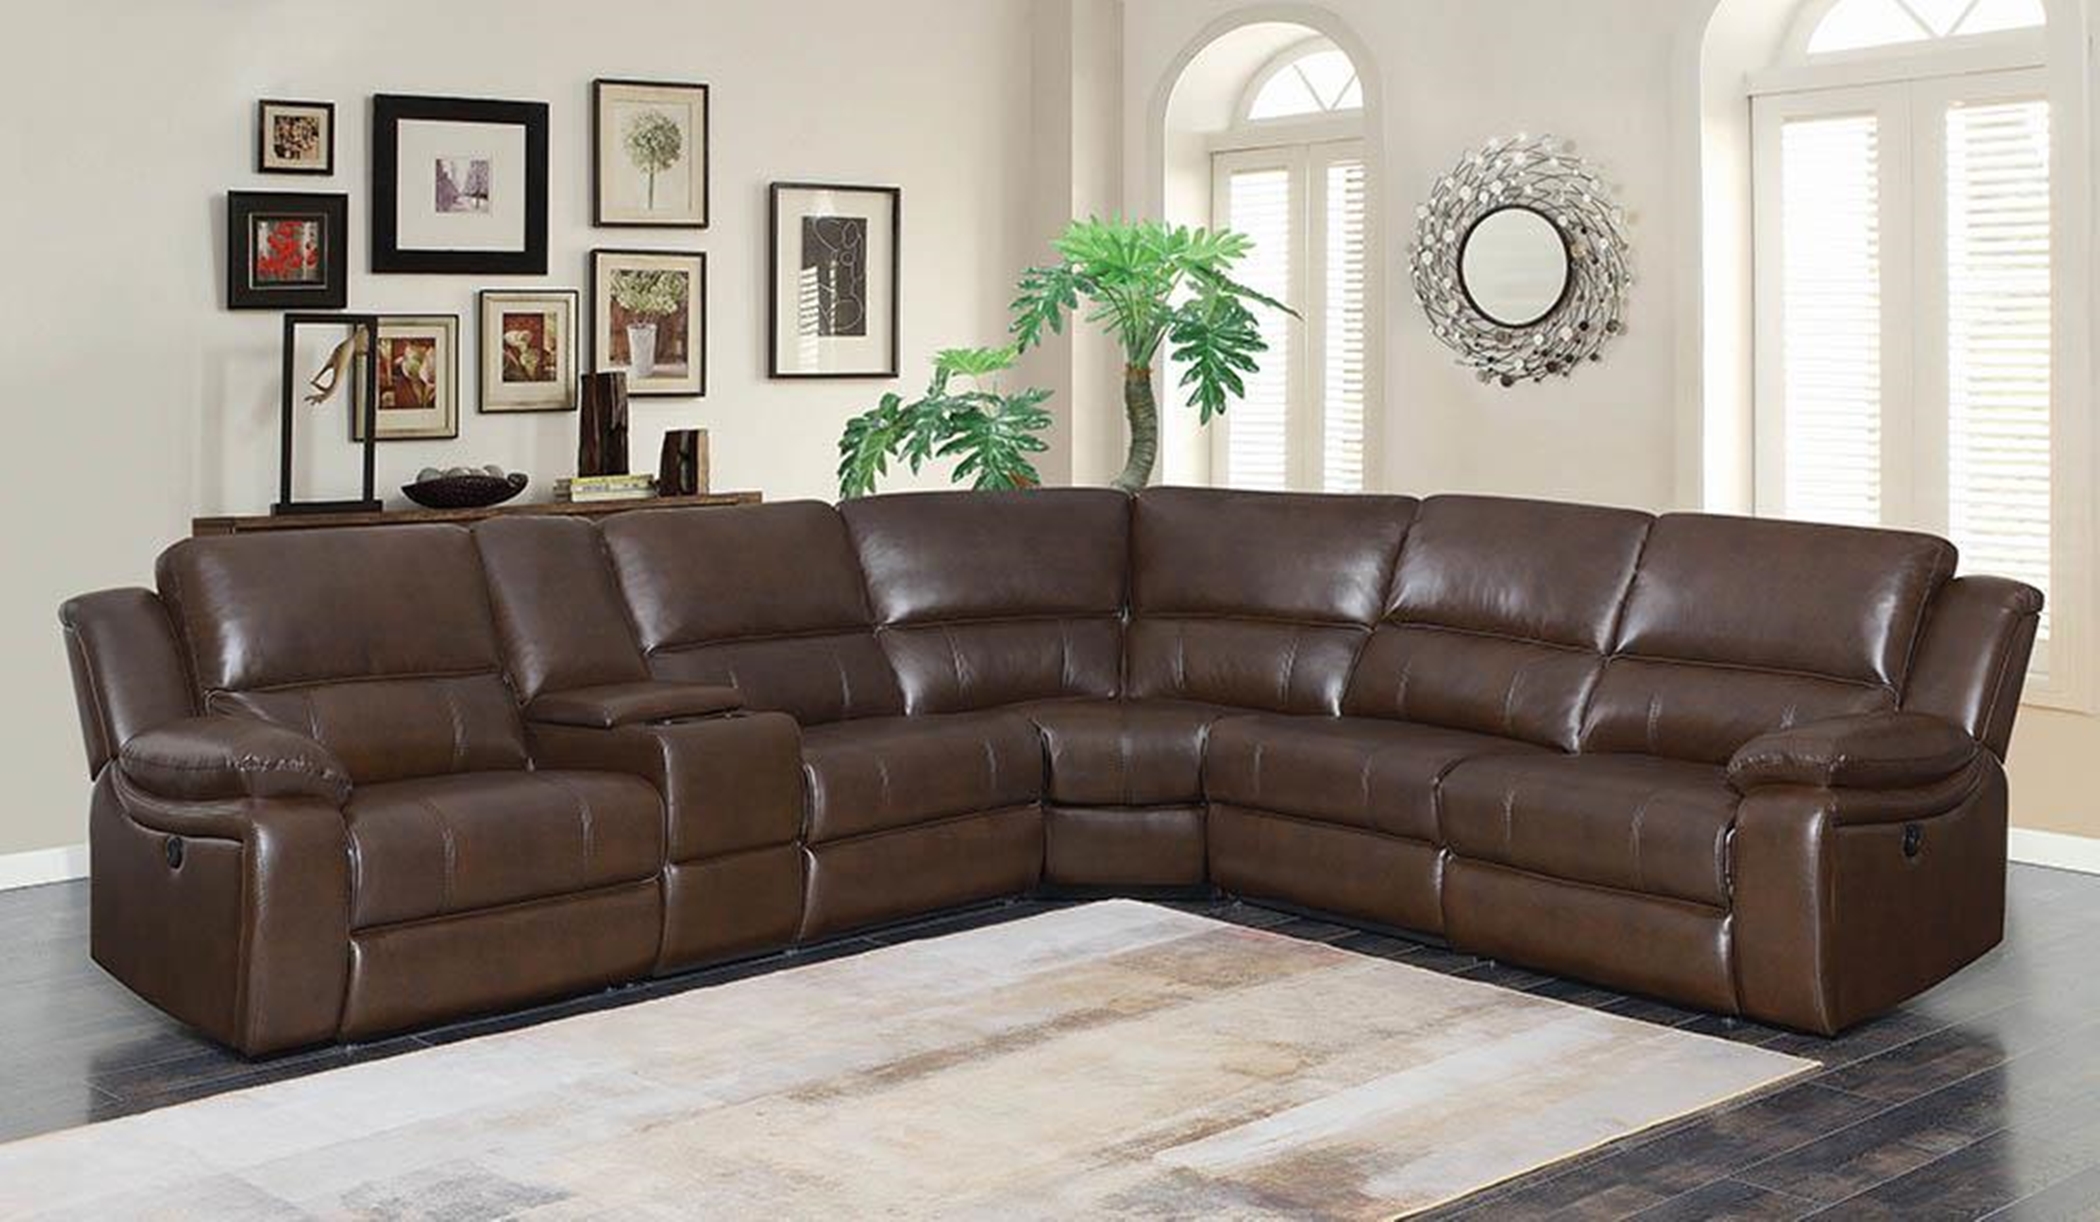 Channing Brown 6pcs Power Sectional